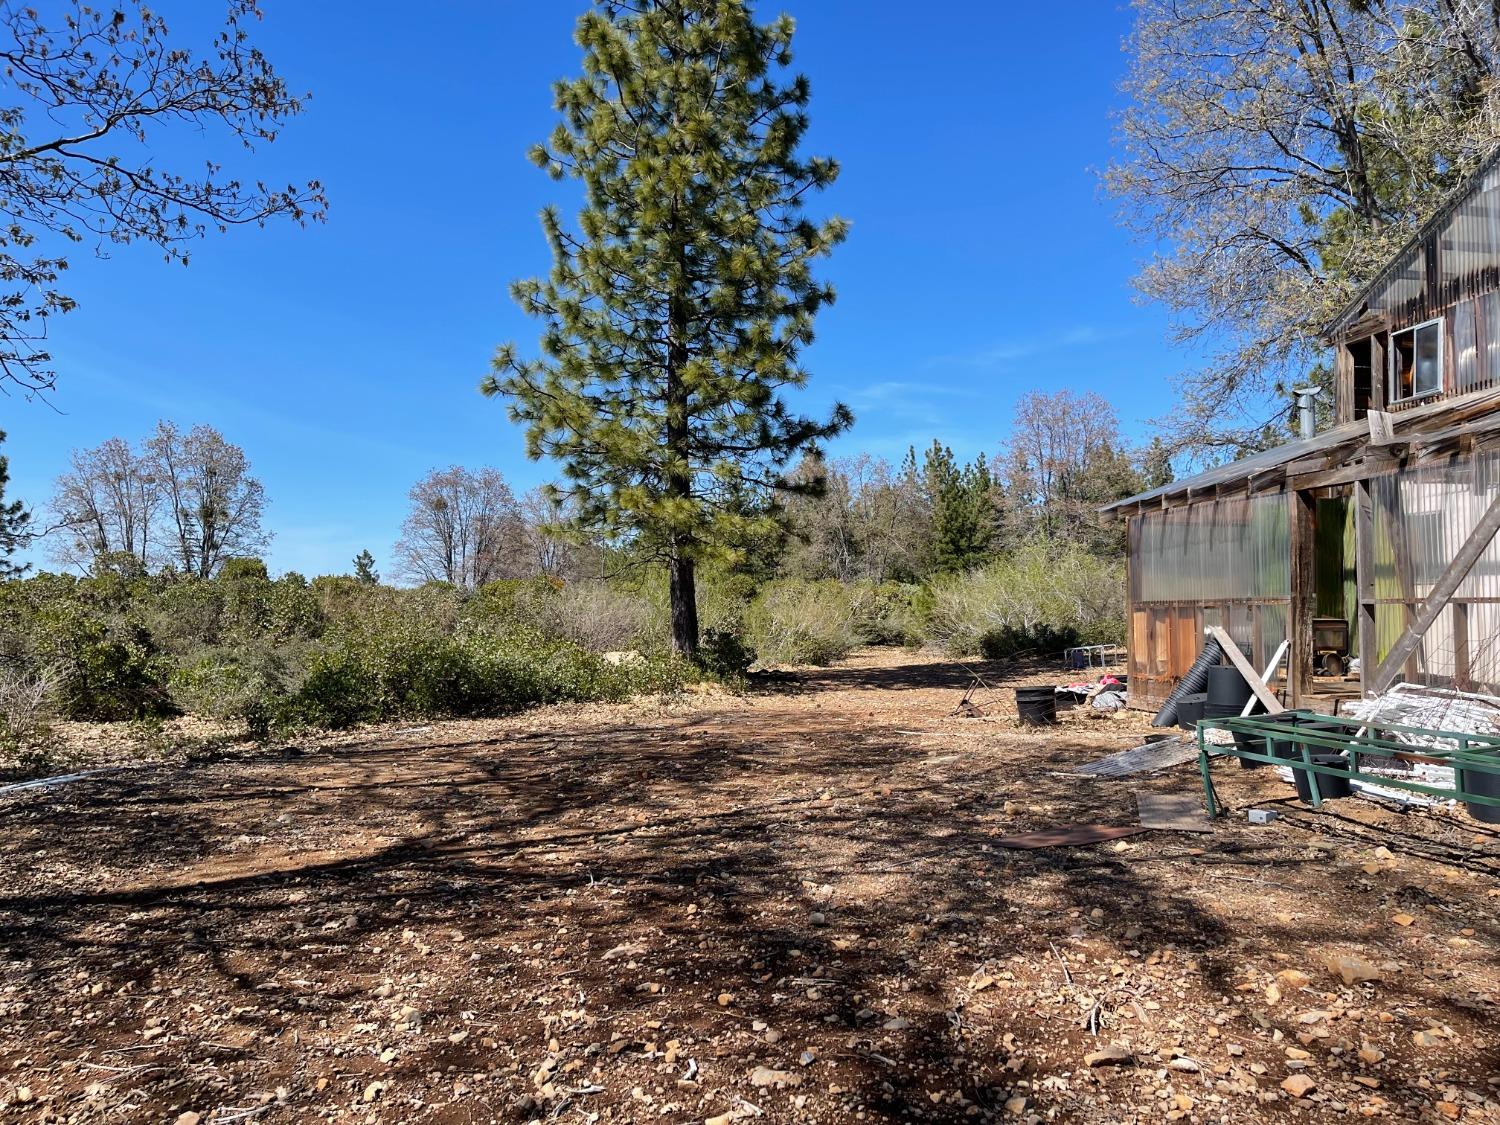 Photo of 34255-A Foresthill Rd in Foresthill, CA